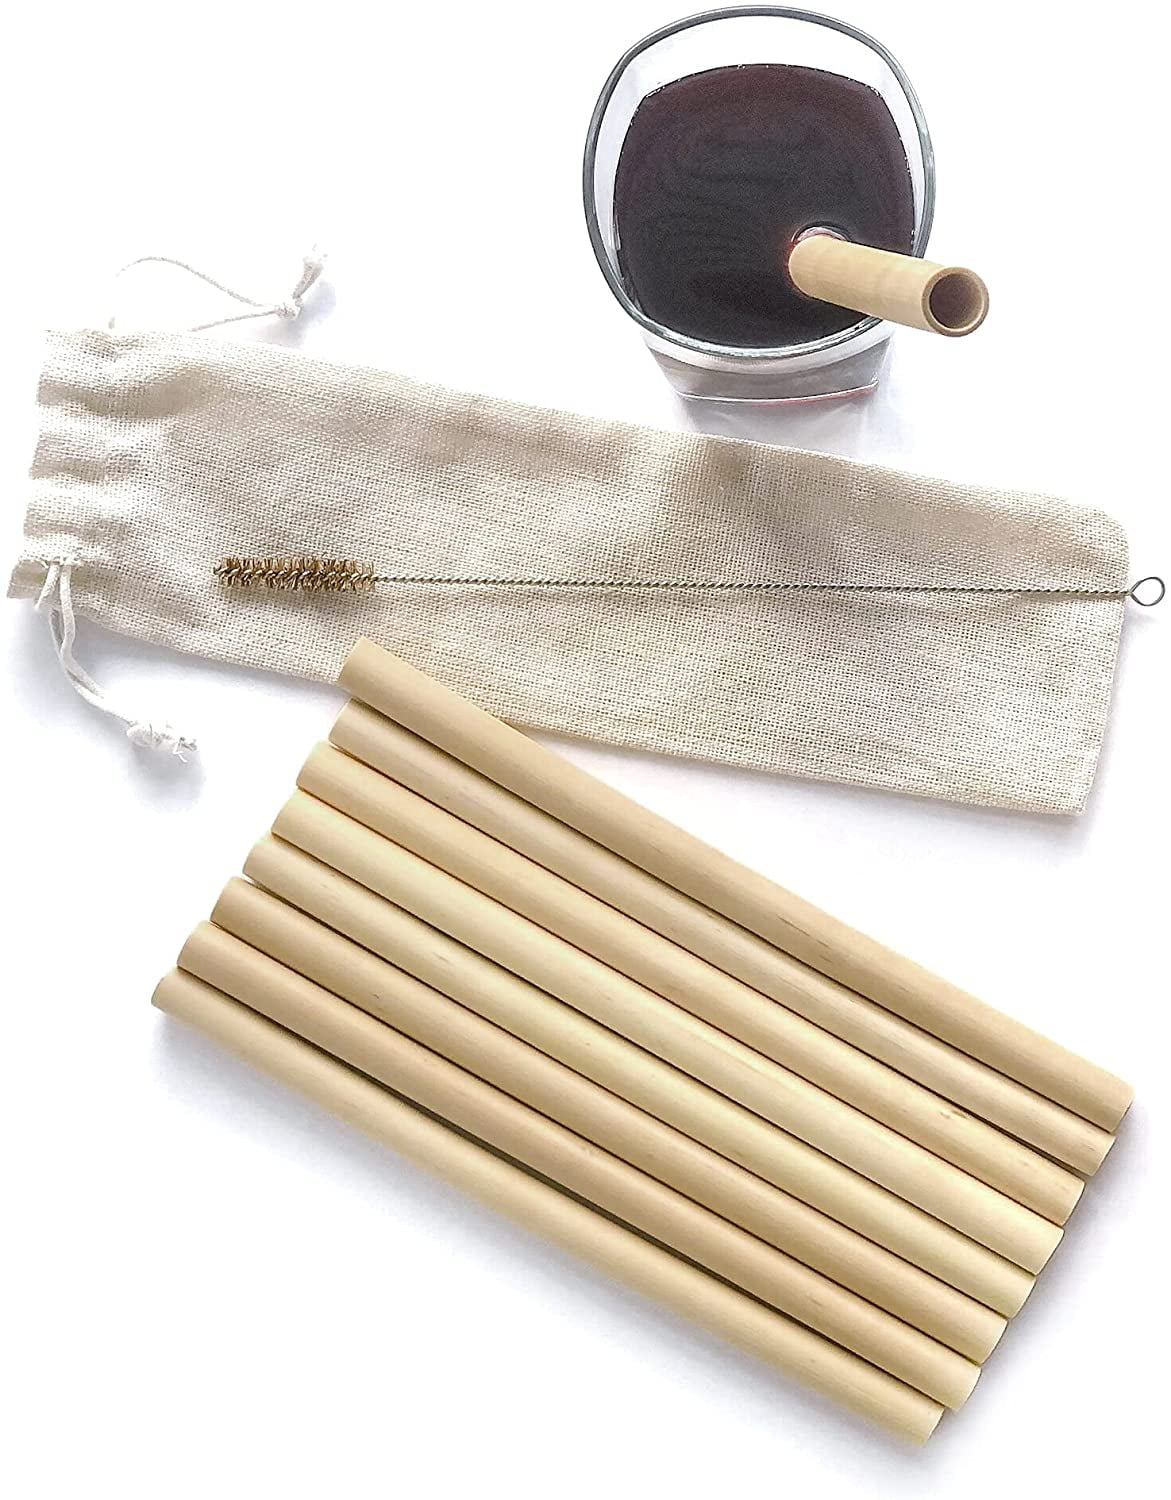 Bamboo Straws Reusable Reusable Eco Friendly Drinking Straw Set Biodegradable and Organic Healthy Very Sturdy Eco Friendly Drinking Straw Ideal for Party Water Juice Bubble Tea Cocktail Smoothies